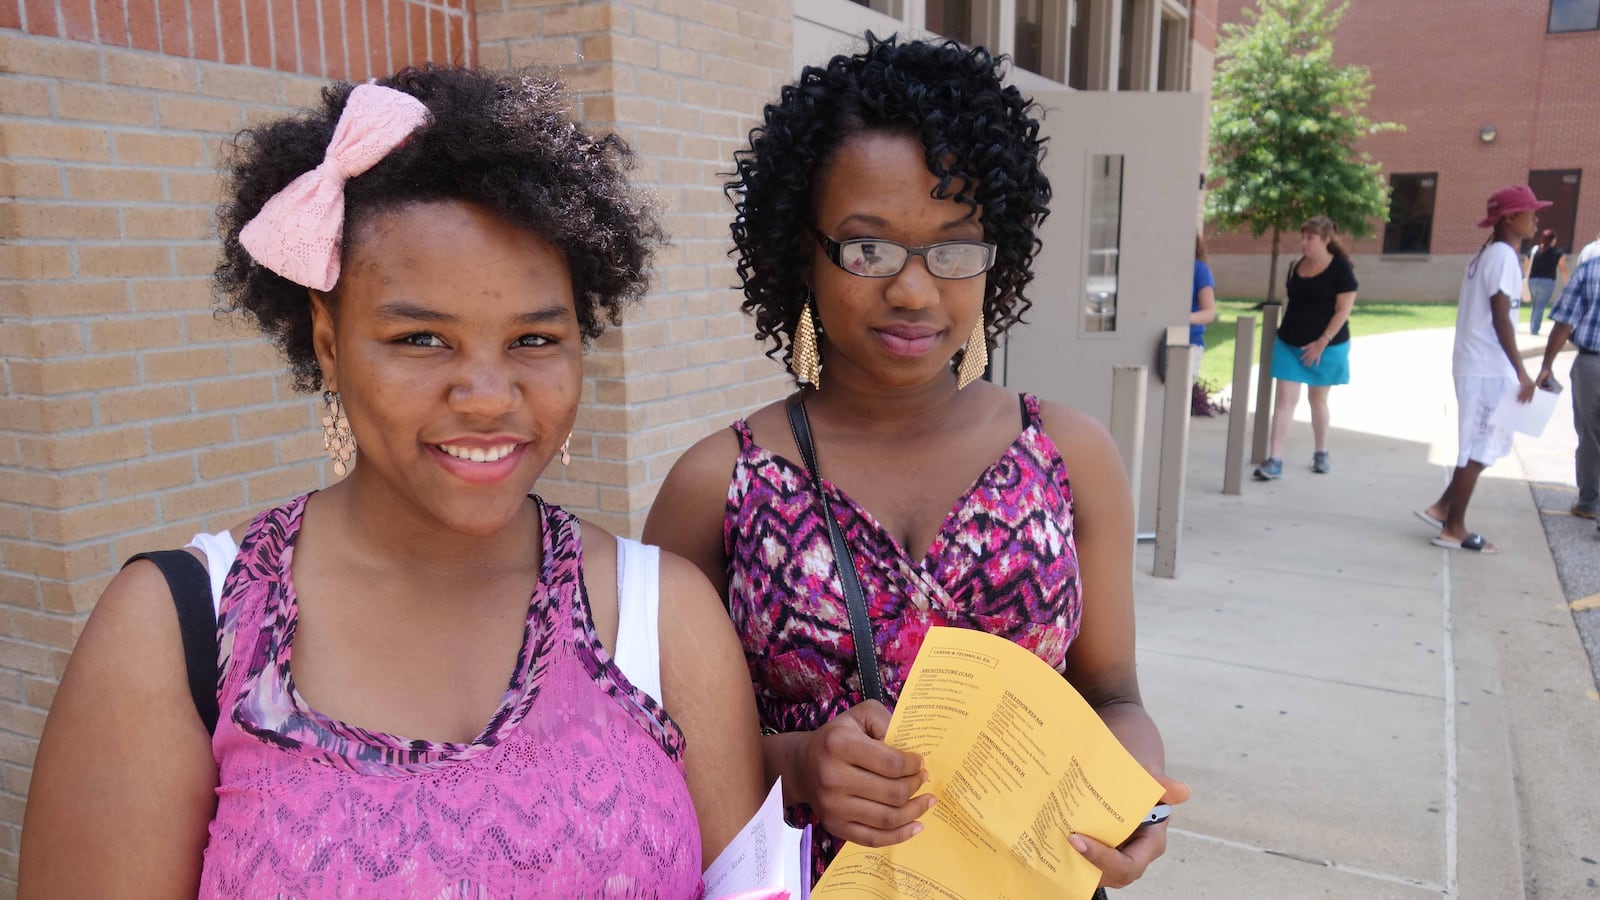 Makayla and Sherlisa McKay registered for classes at Millington High School today. Leaders of the six suburban districts said registration day was more important than ever this year.